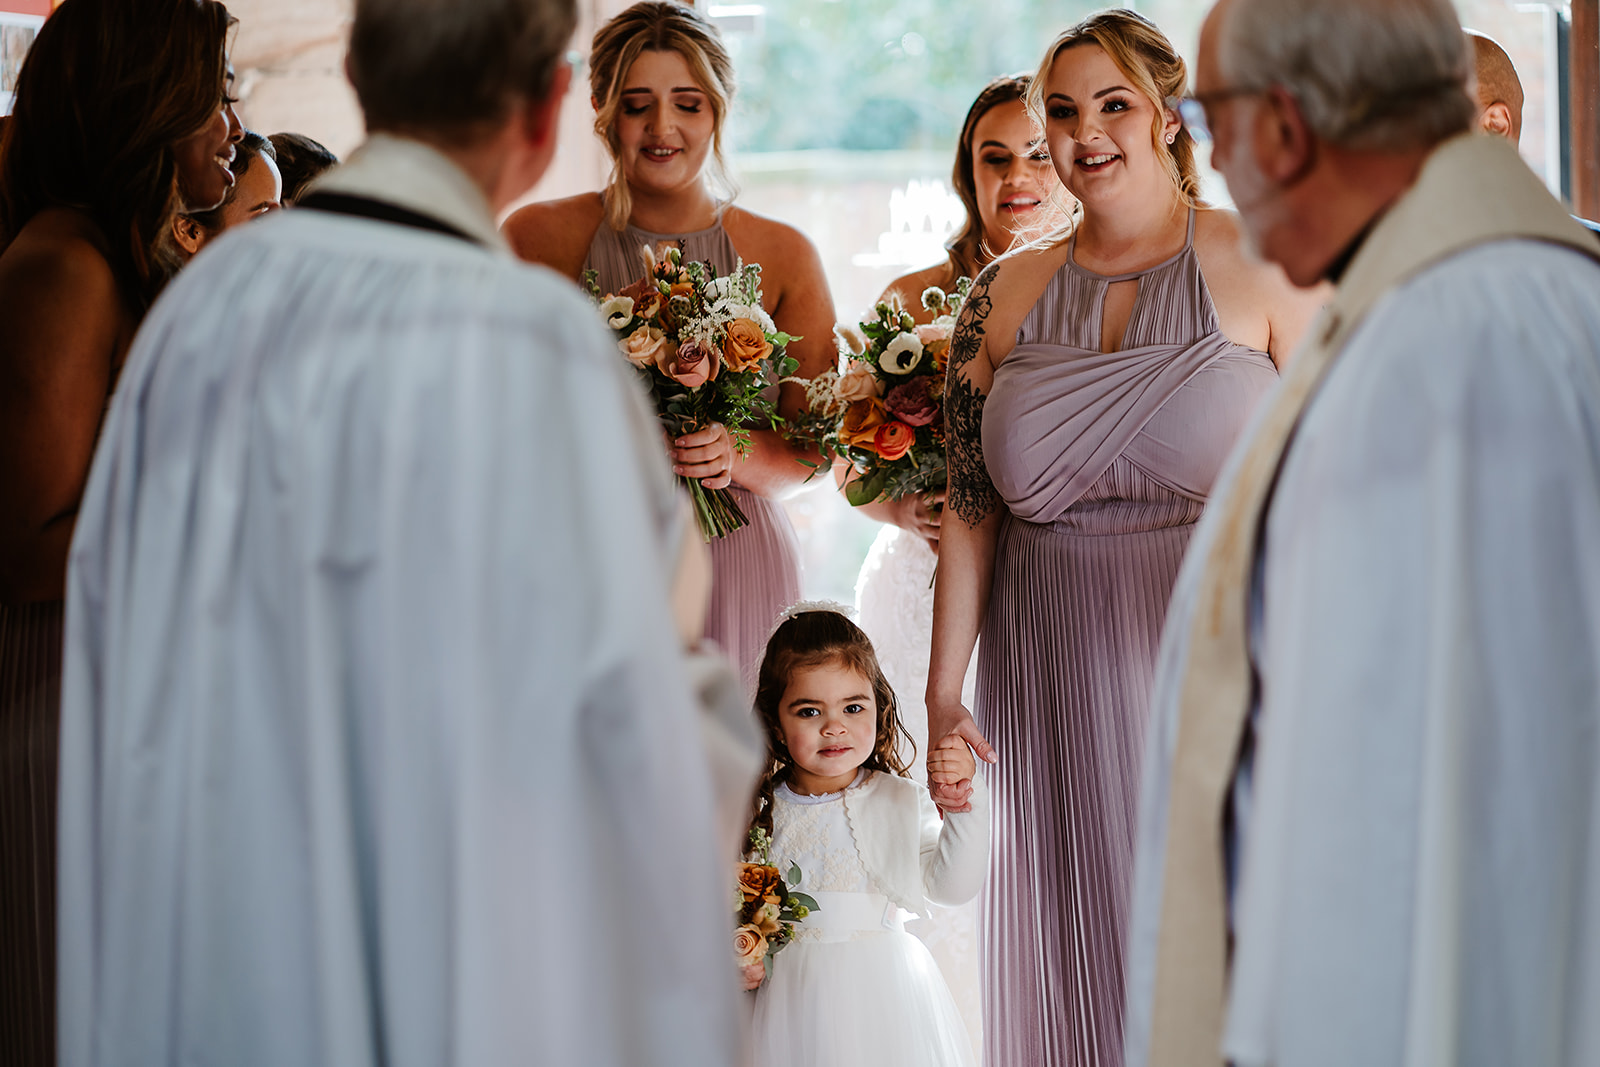 Flower girl and bridesmaids waiting in entrance to church